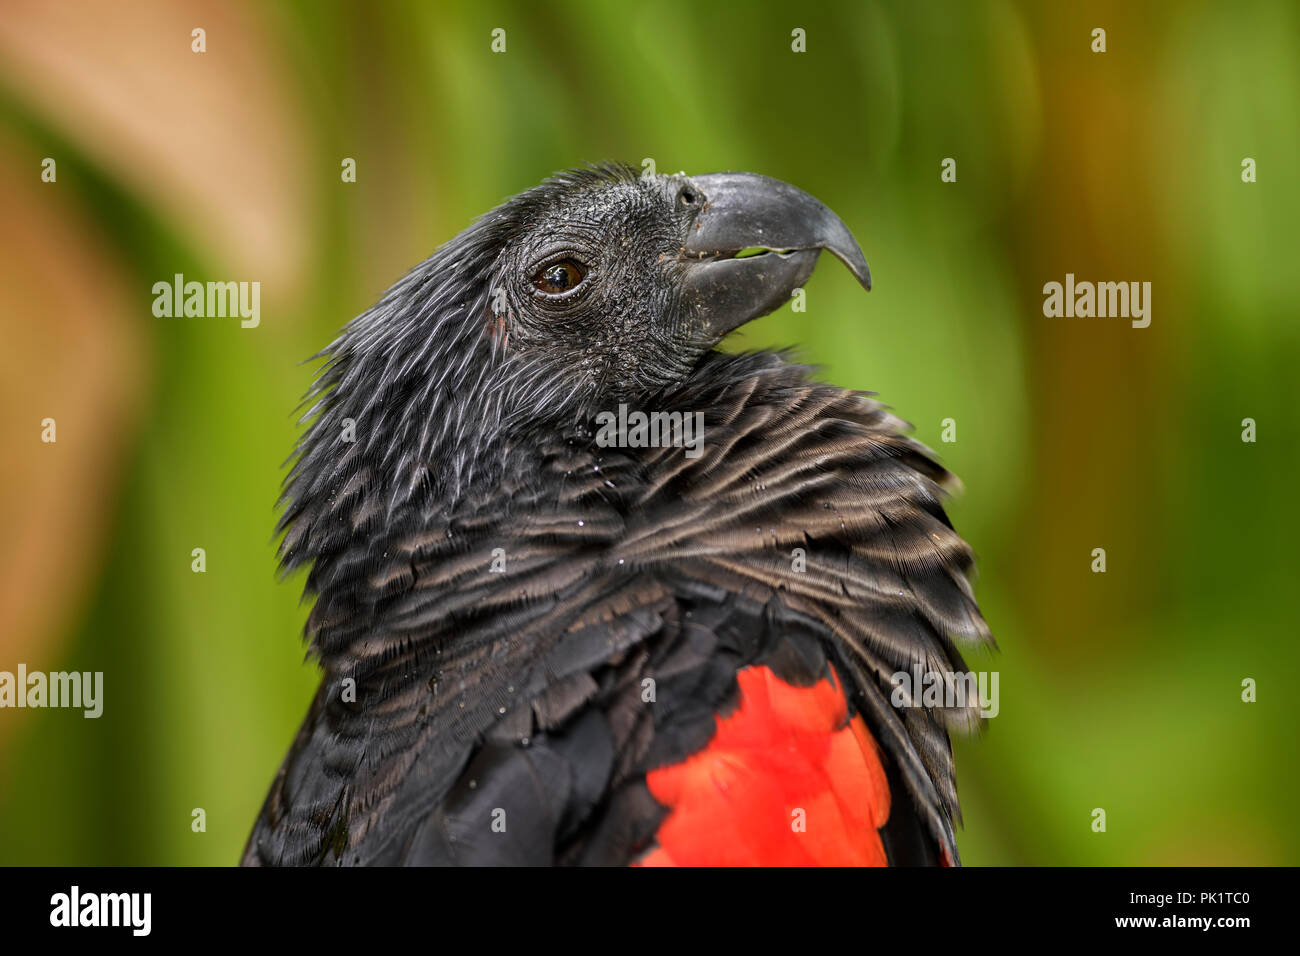 Pesquet's Parrot - Psittrichas fulgidus, large black and red parrot from New Guinea forests and woodlands. Stock Photo